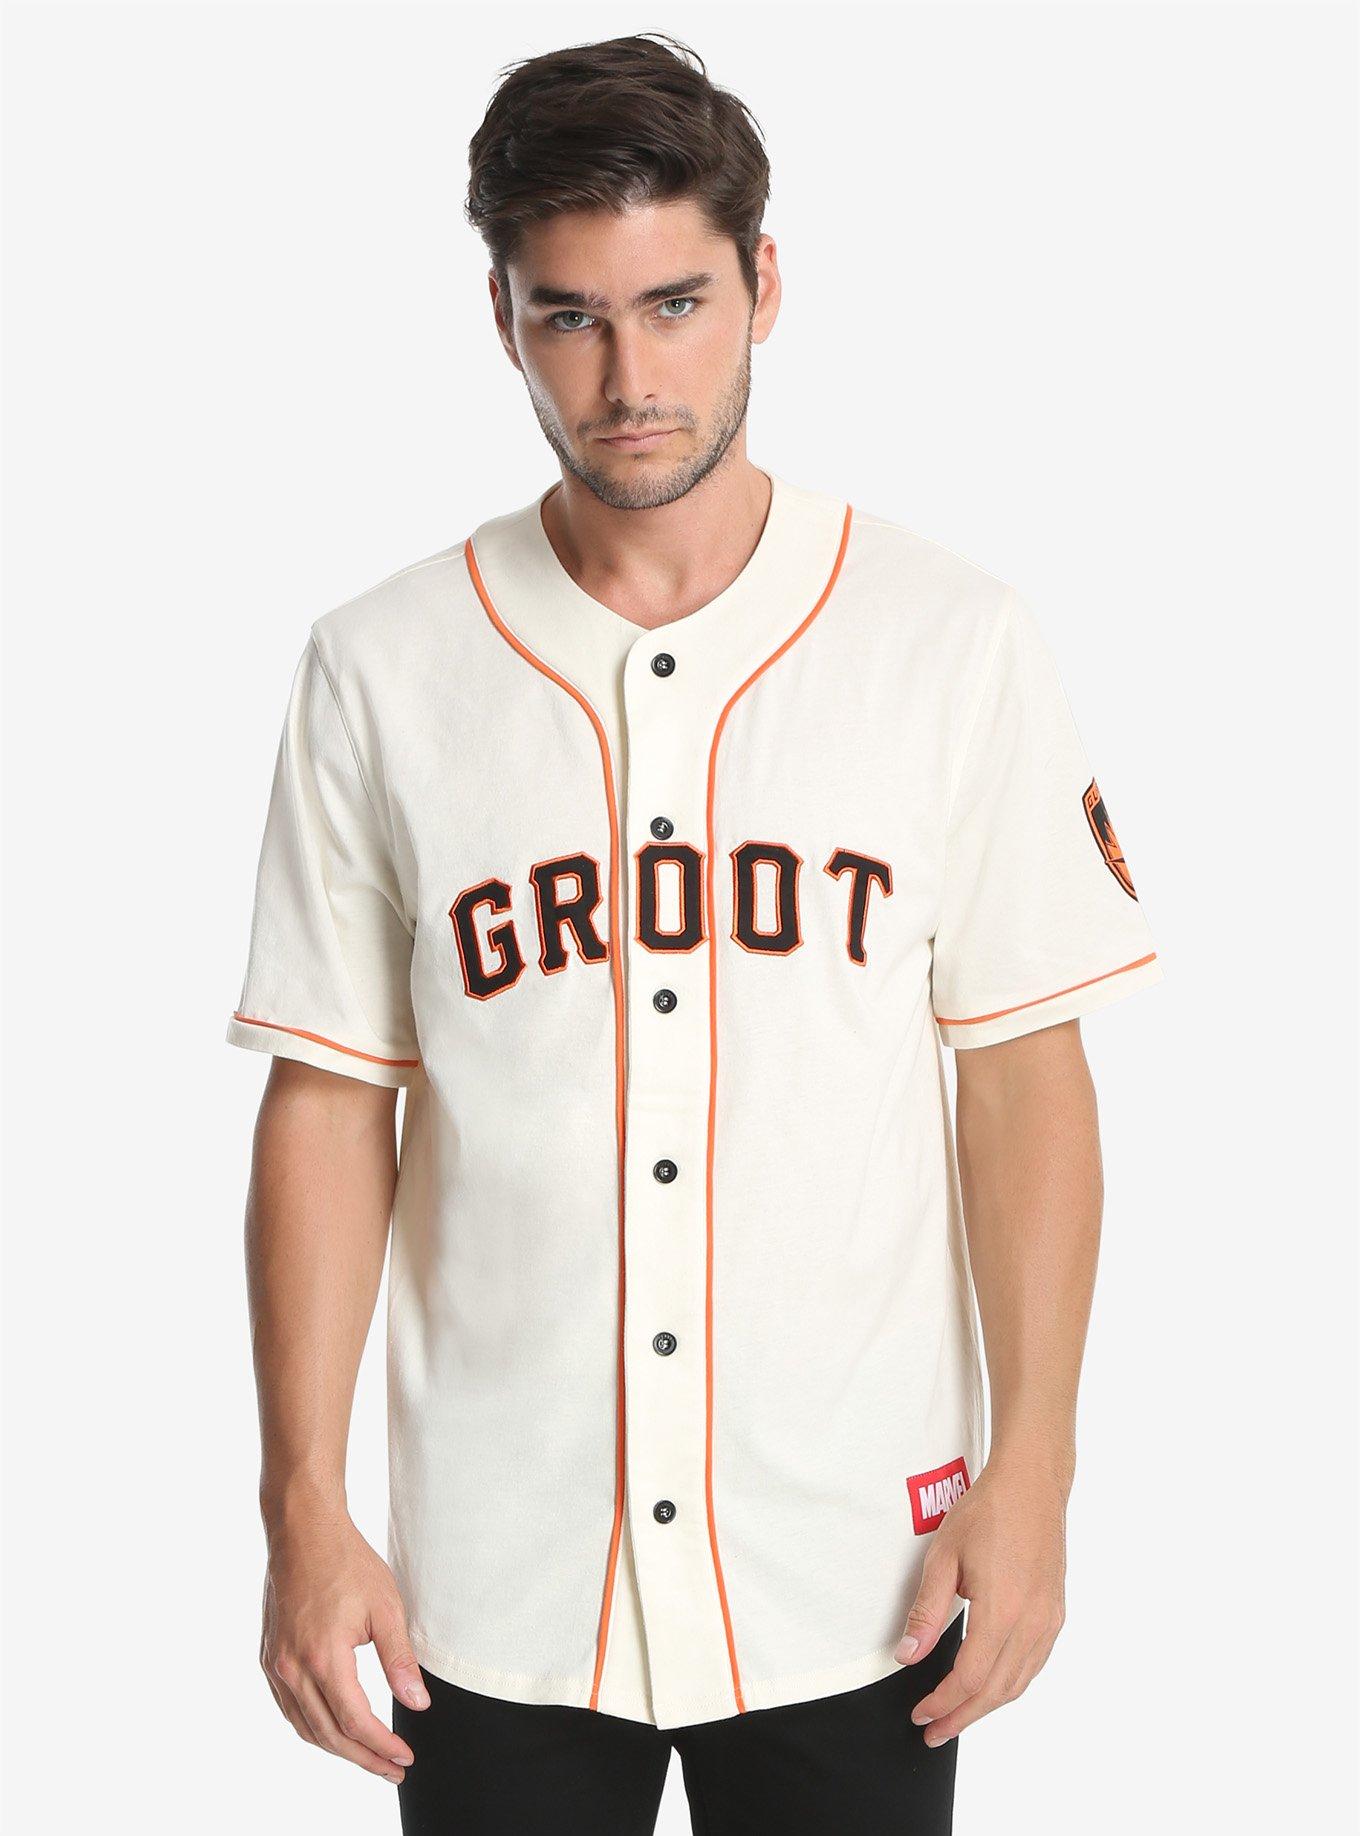 Marvel Guardians Of The Galaxy Groot Baseball Jersey - BoxLunch Exclusive